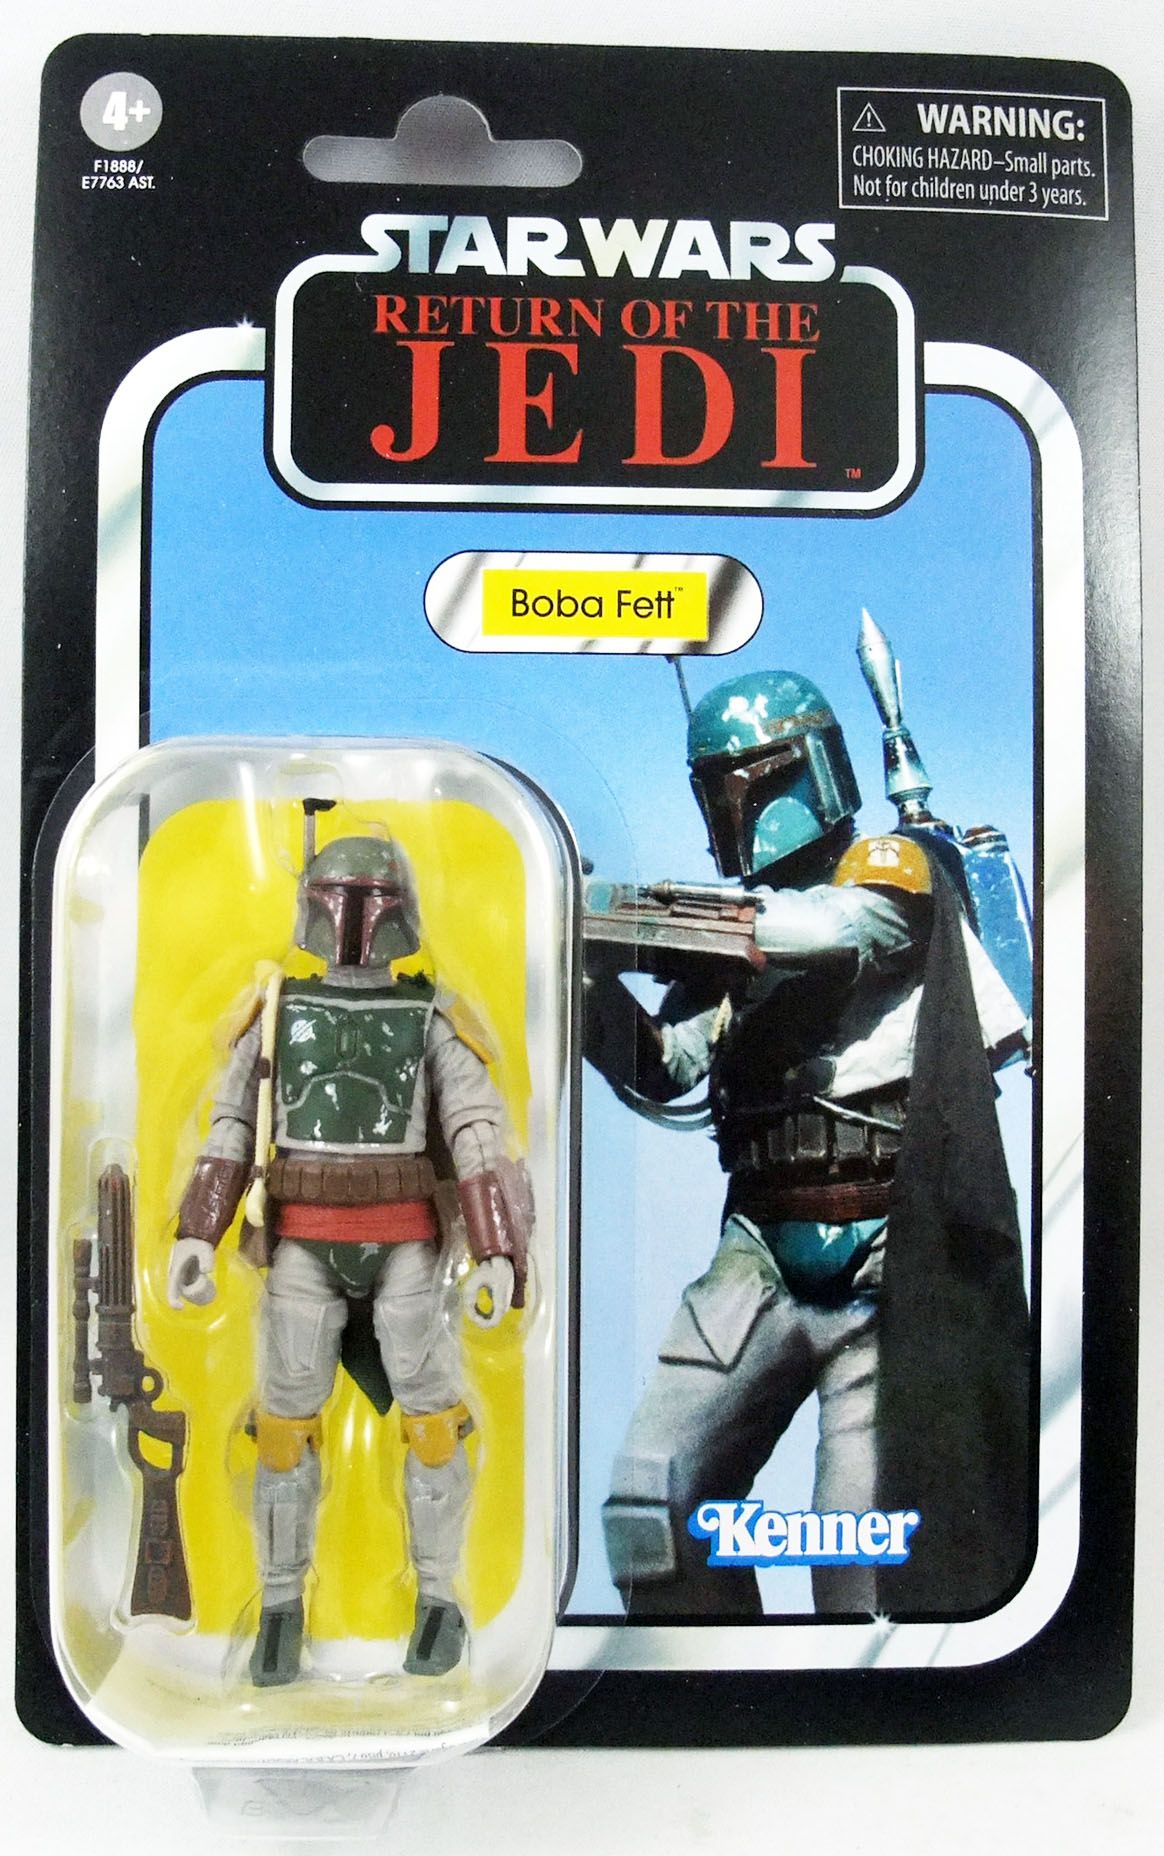 Star Wars The Vintage Collection Boba Fett F1888 Return of the Jedi 